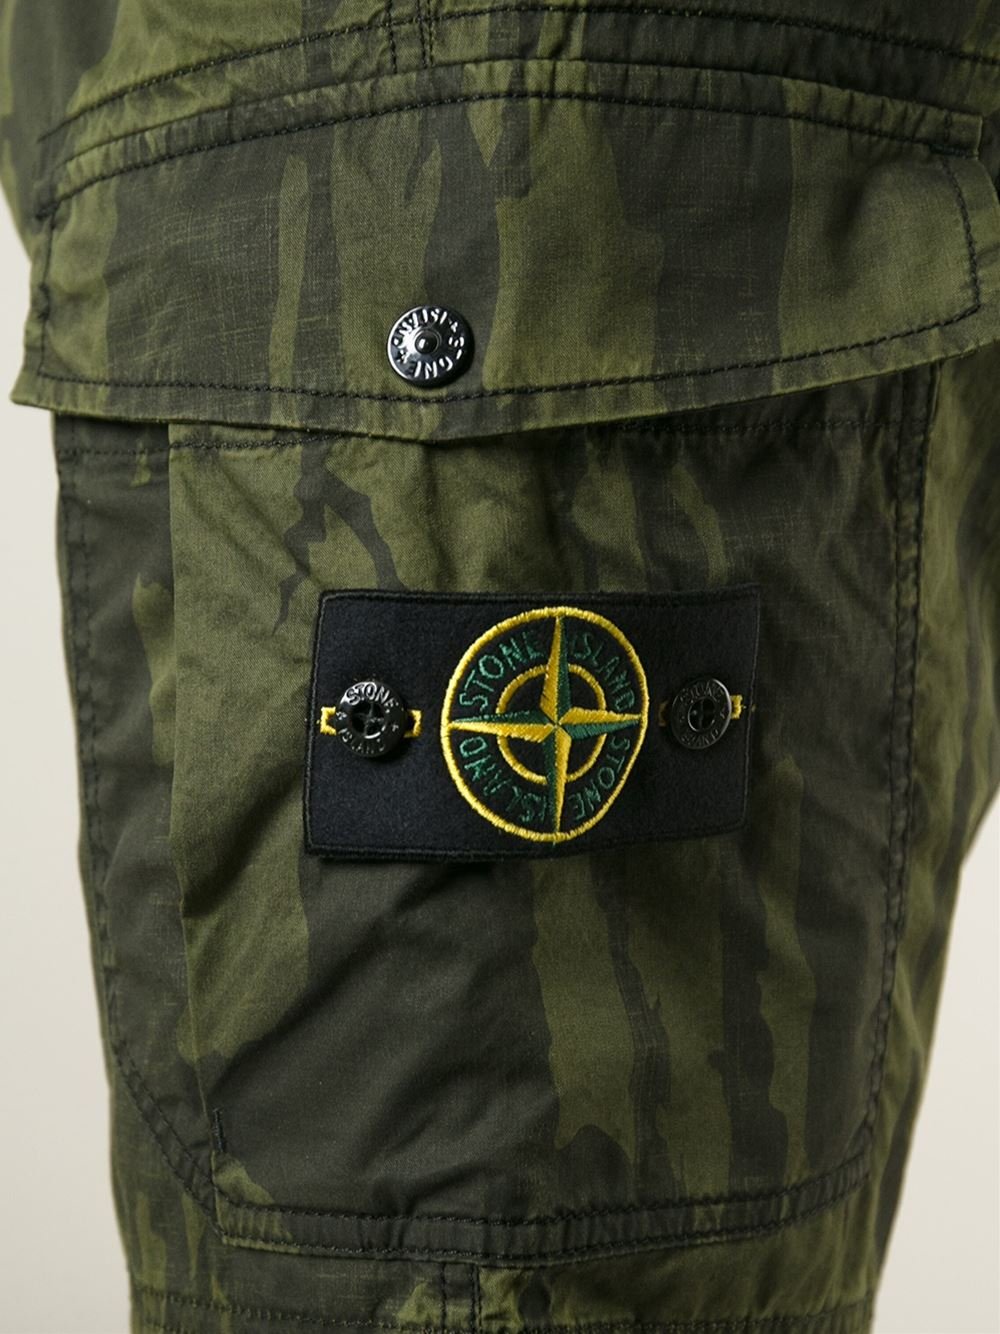 Stone Island Camouflage Cargo Shorts in Green for Men - Lyst